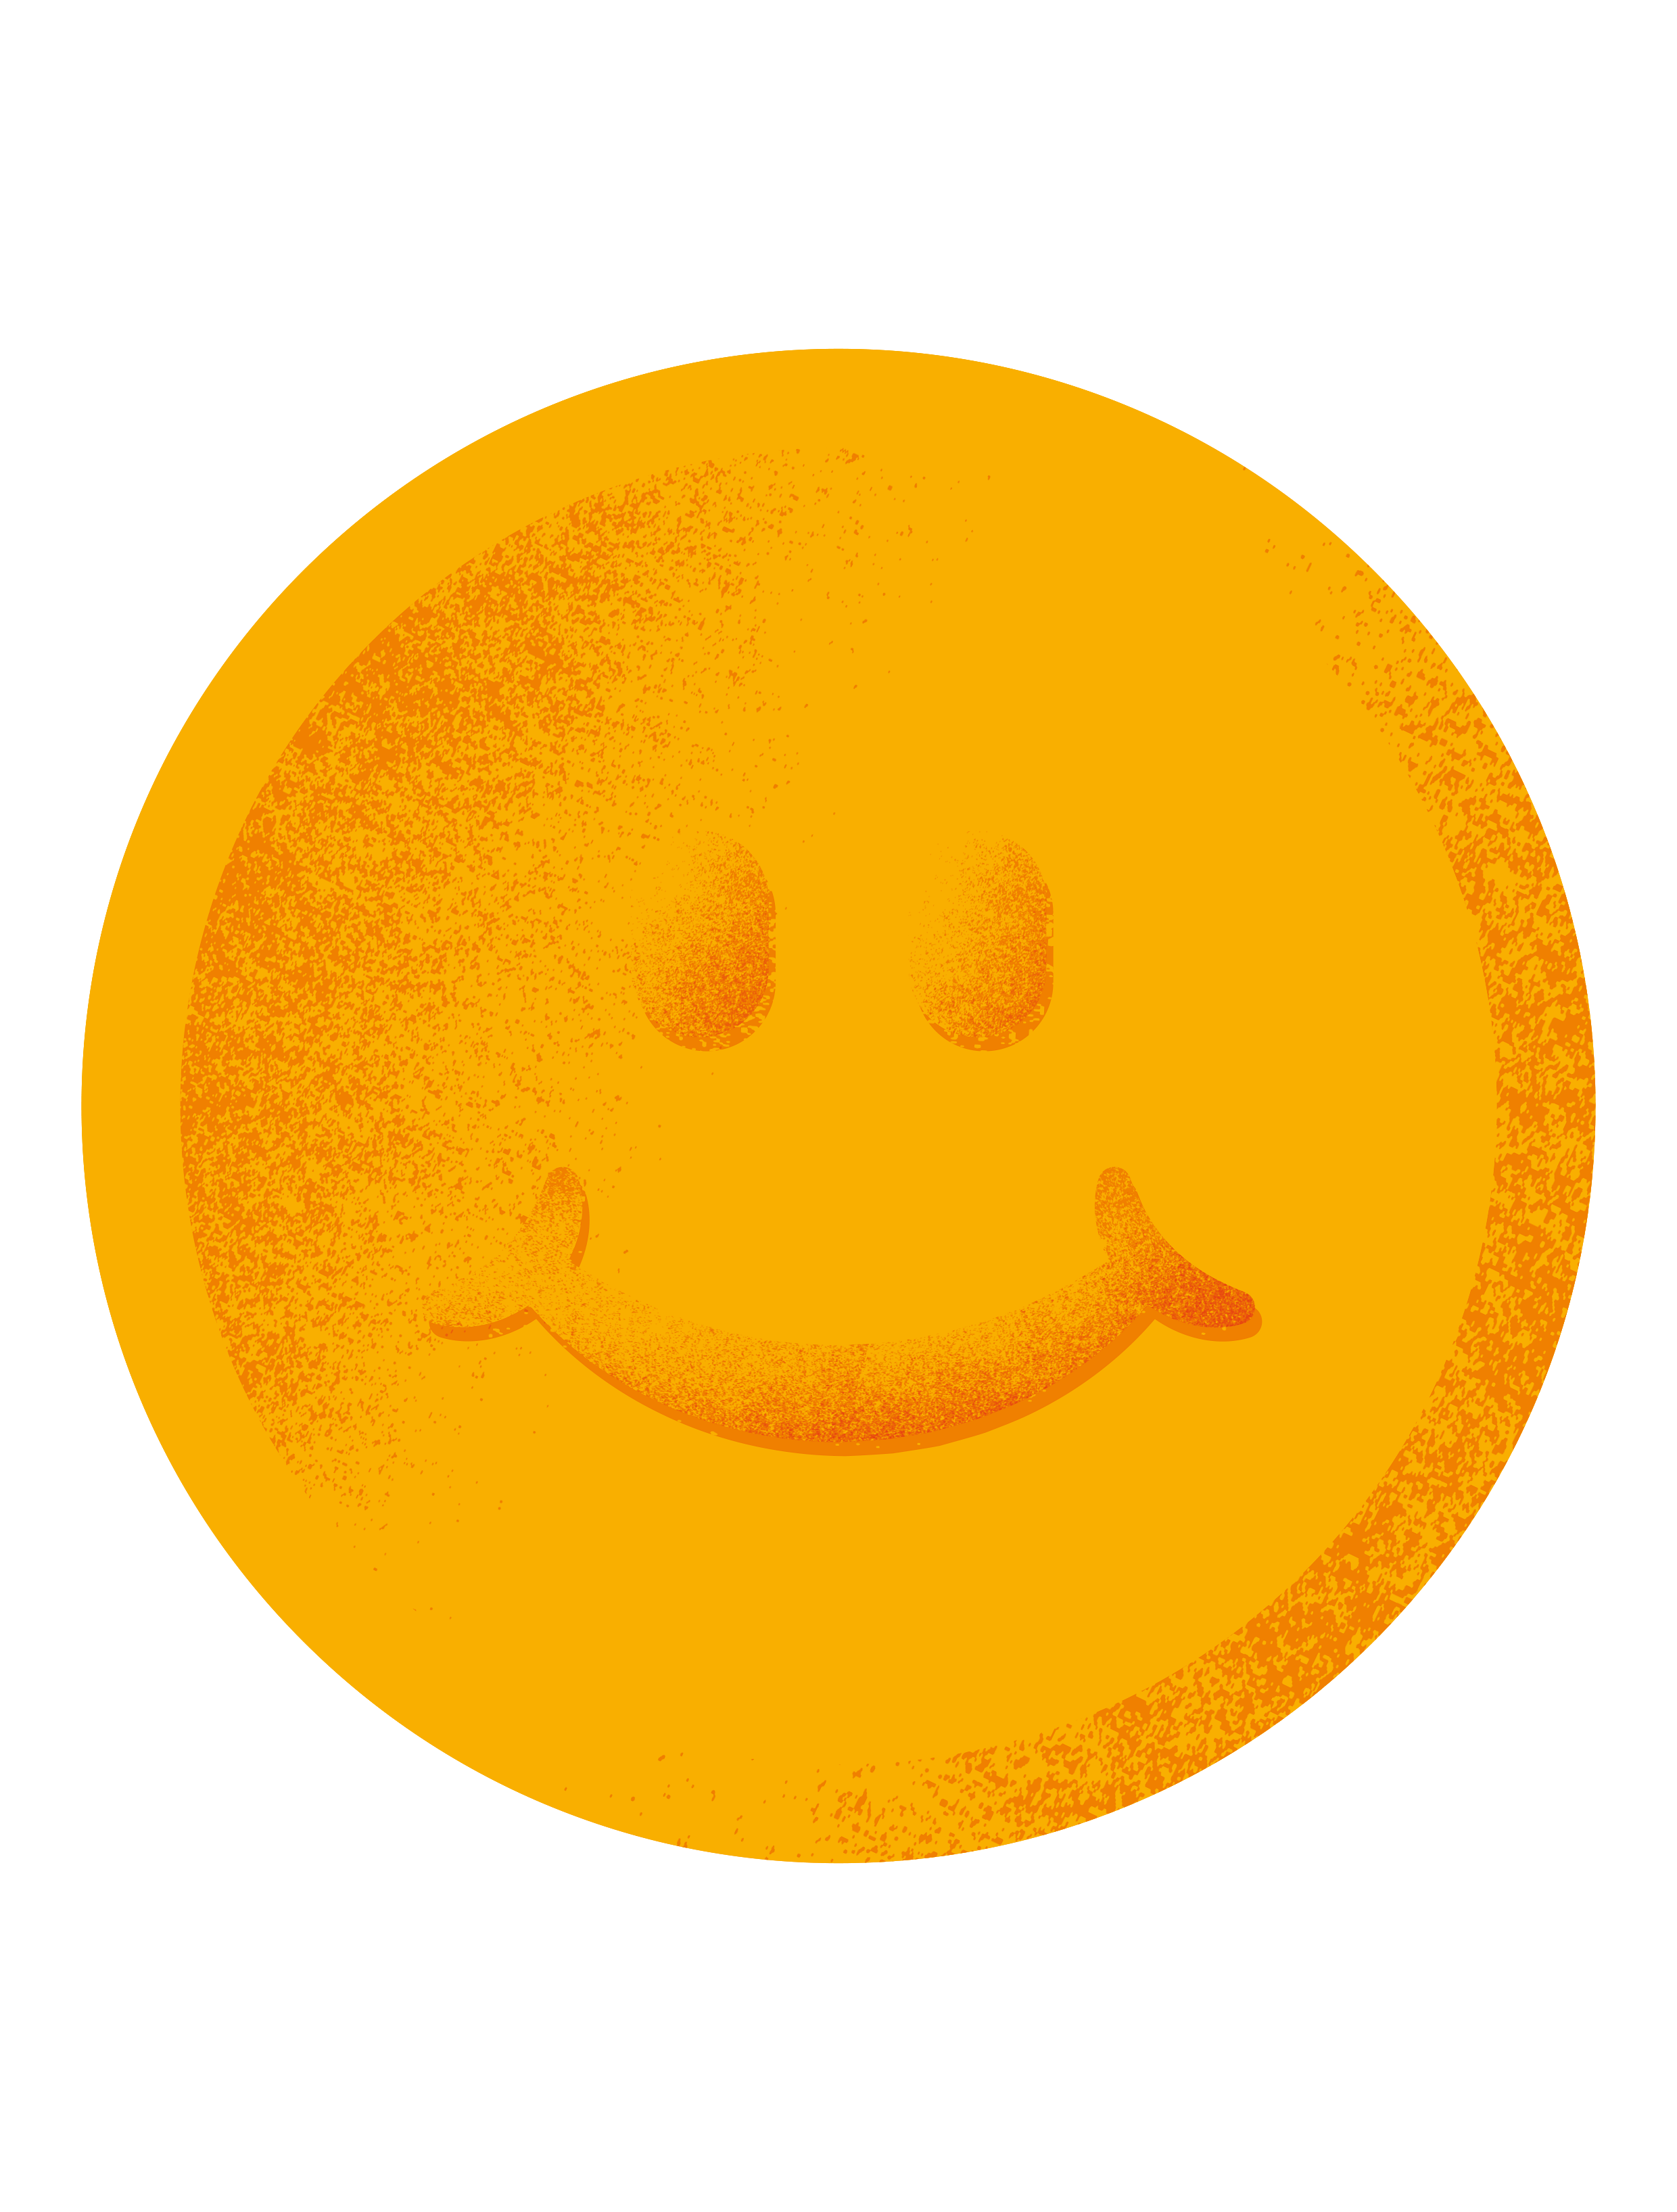 Illustrated coin with smiley